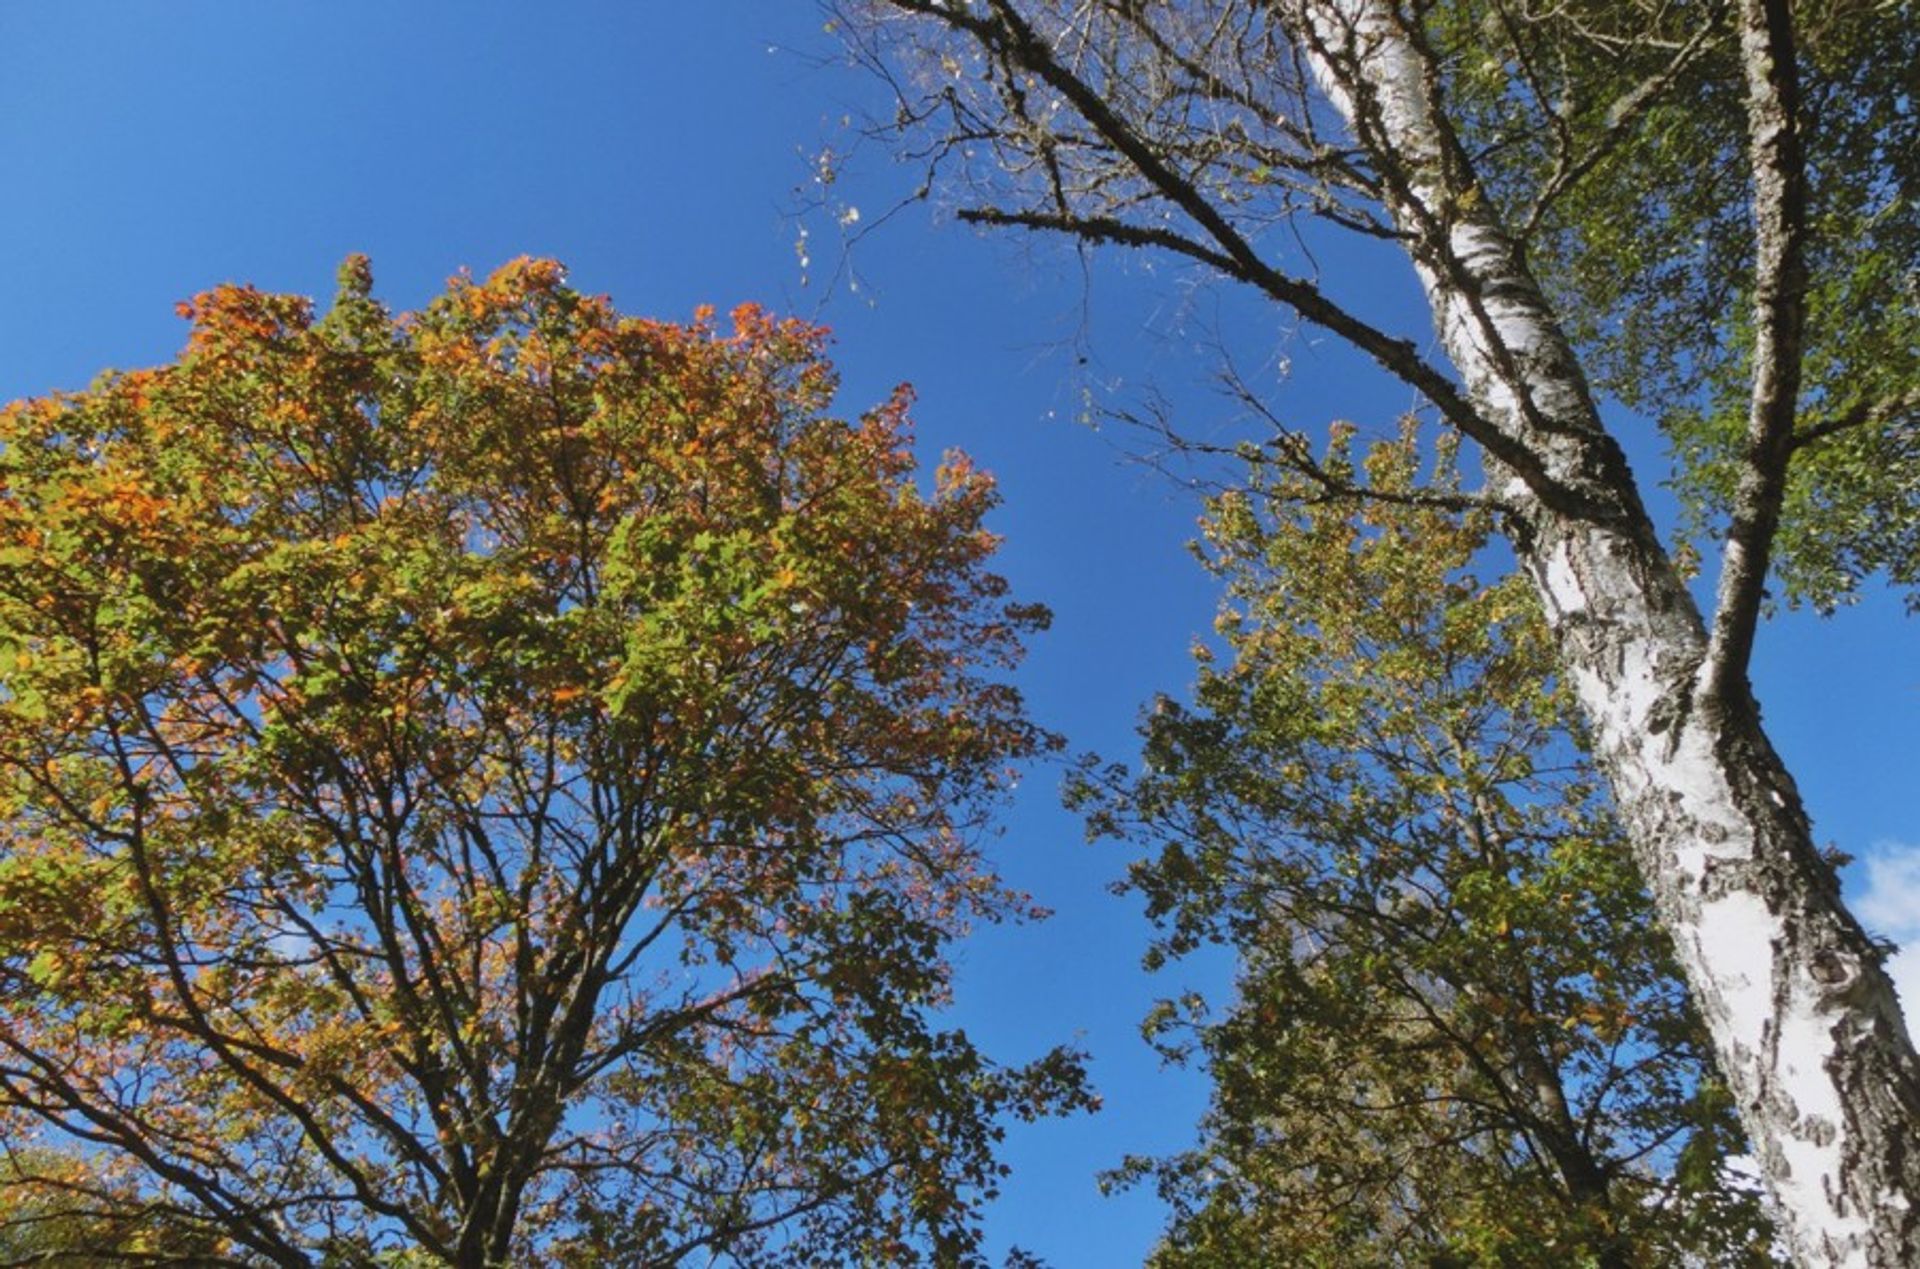 A picture taken from below where the blue sky is visible and two lagre trees with green and orange leaves. The sun is also shining.